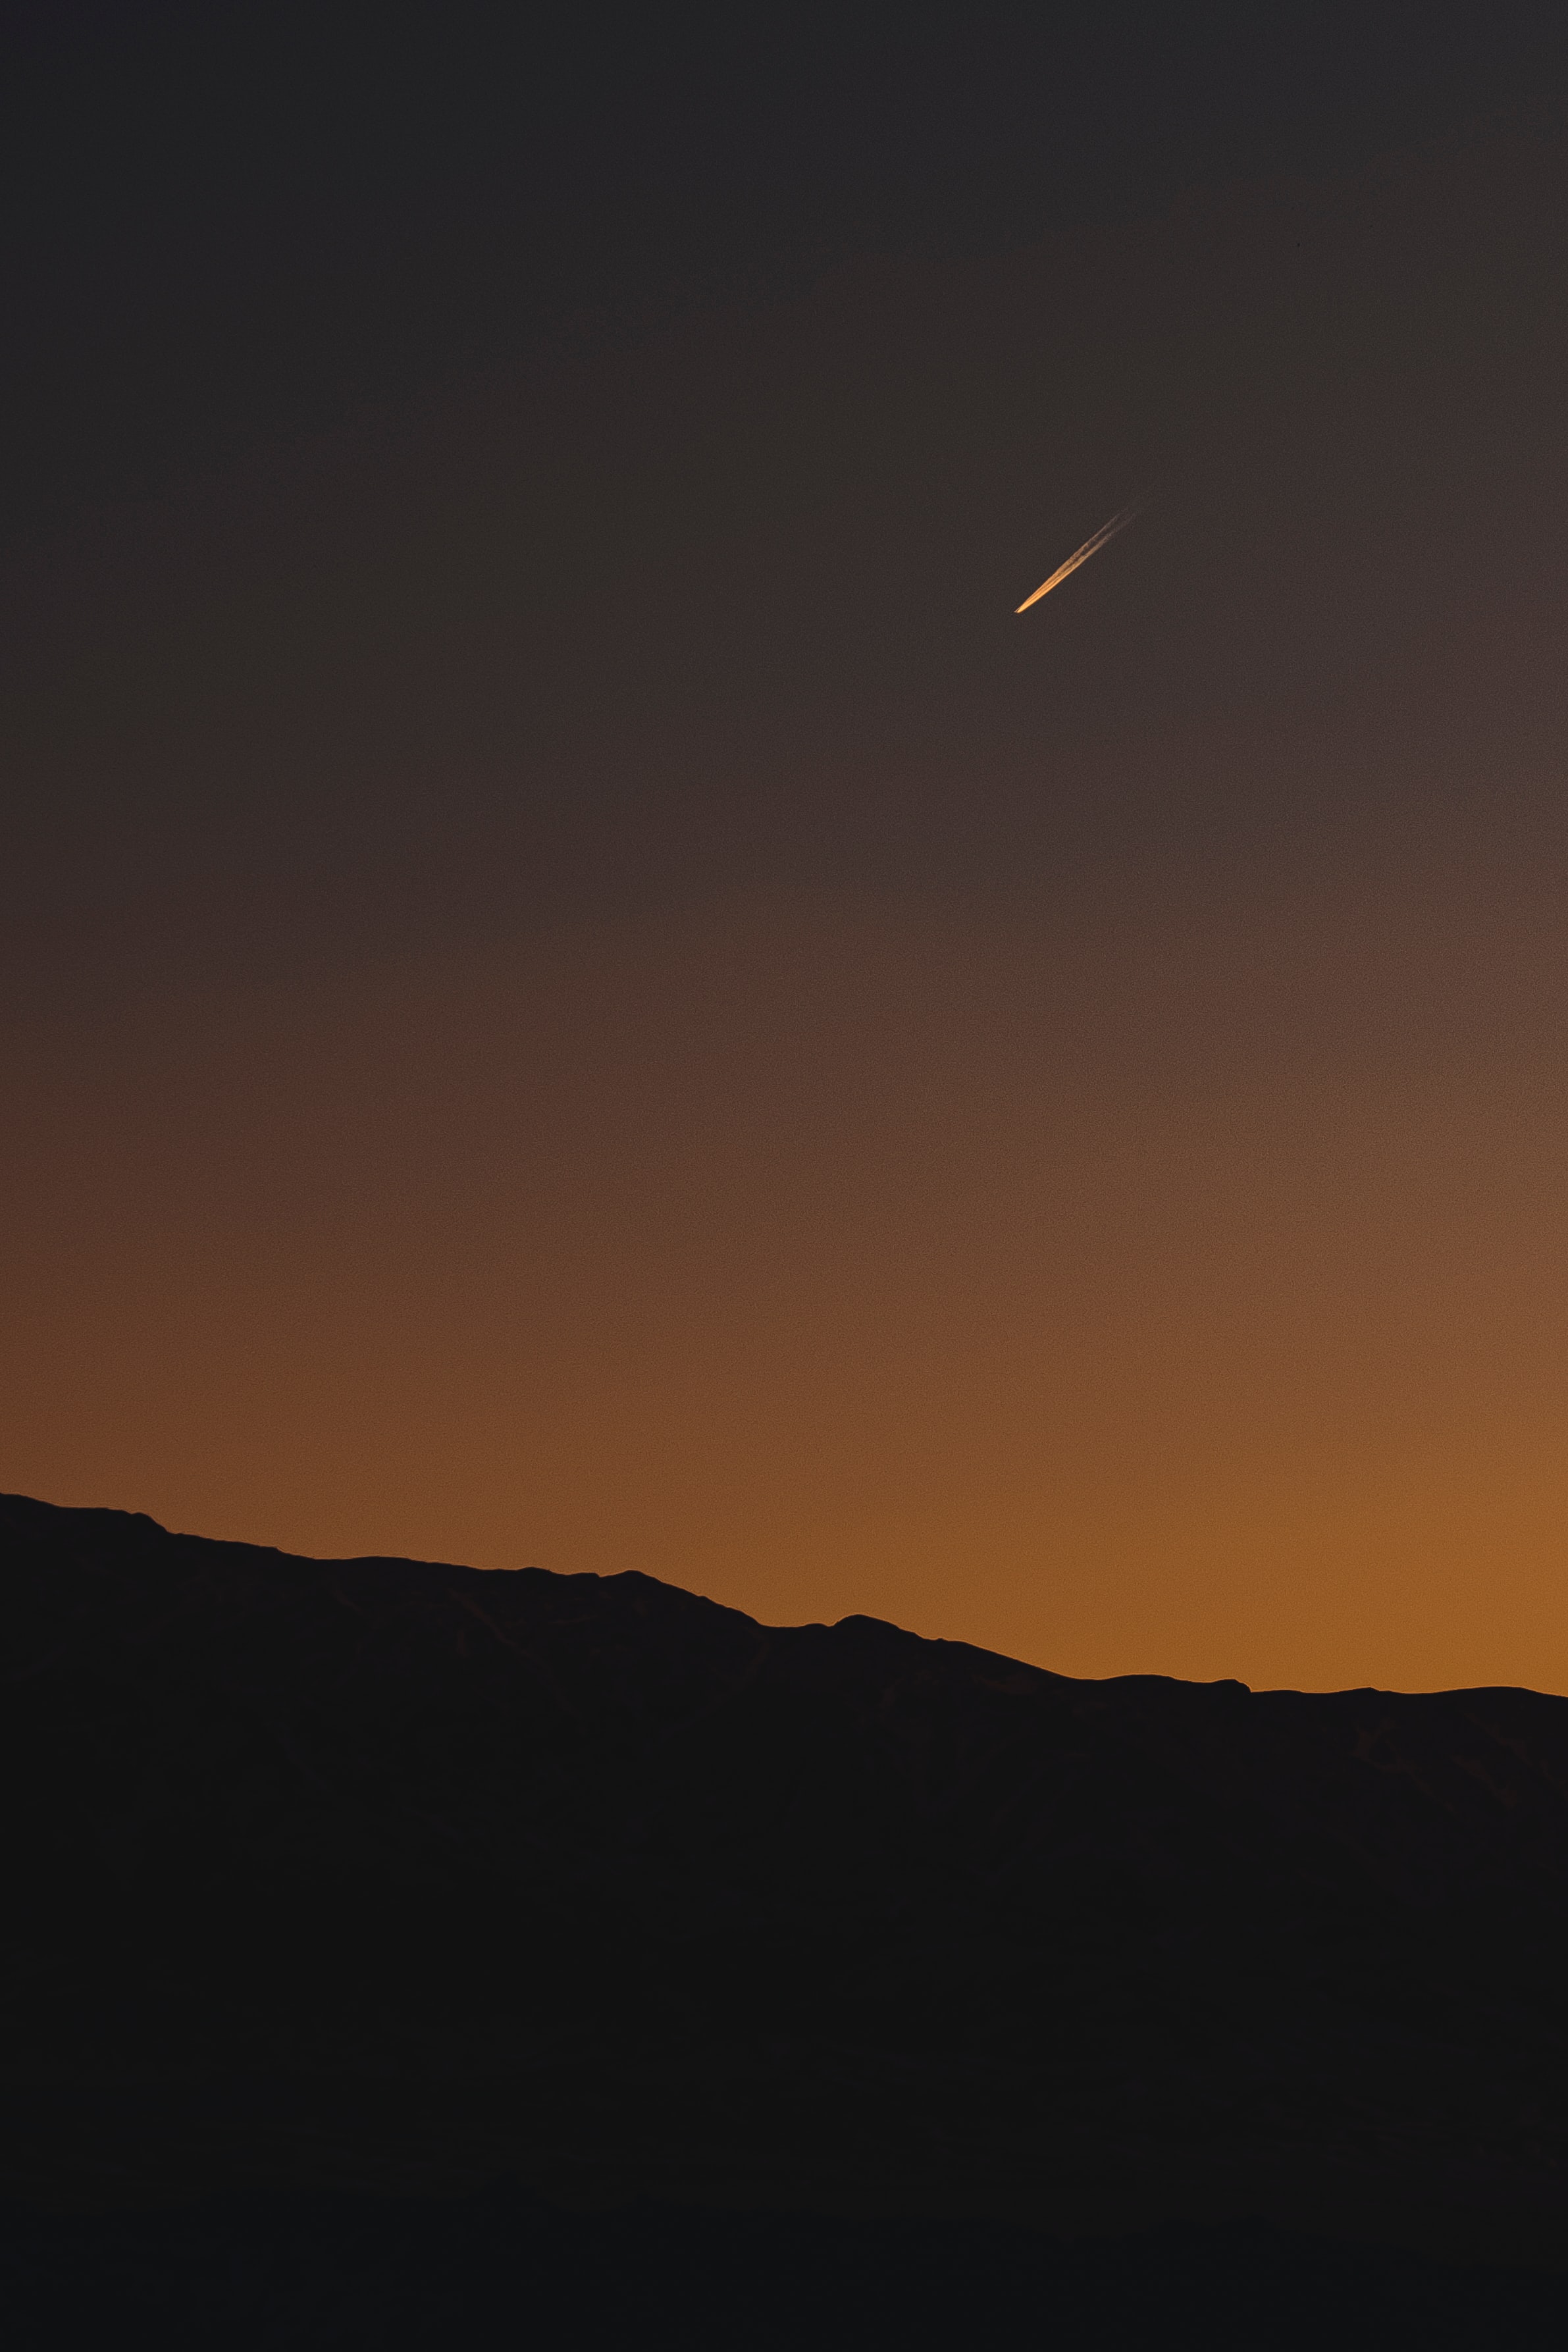 night, dark, mountains, outlines, meteor images